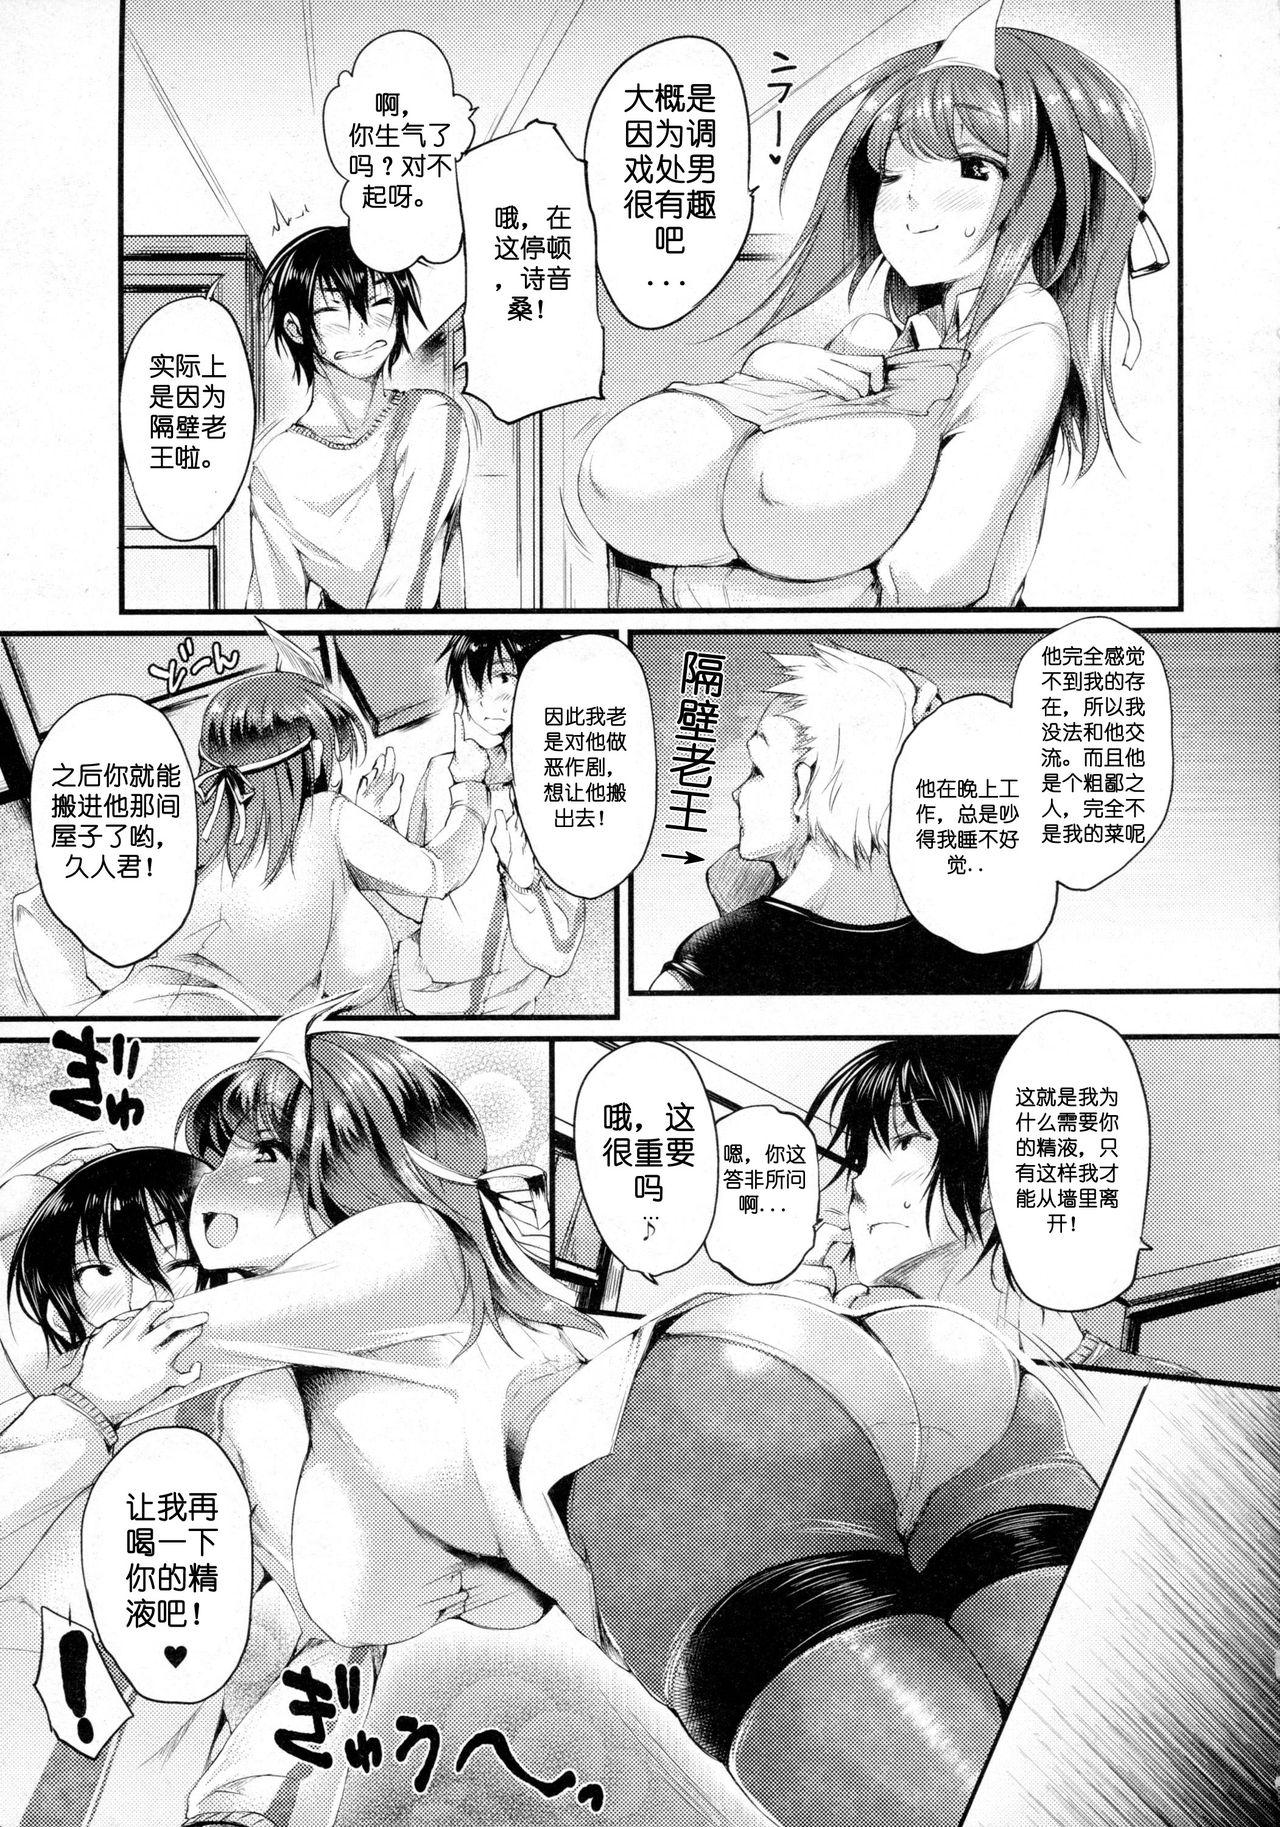 [Oohira Sunset] 202-Goushitsu no Yuurei-san | The Ghost in Room 202 (COMIC Unreal 2016-02 Vol. 59) [Chinese] [简称天子个人汉化] (Ongoing) 2